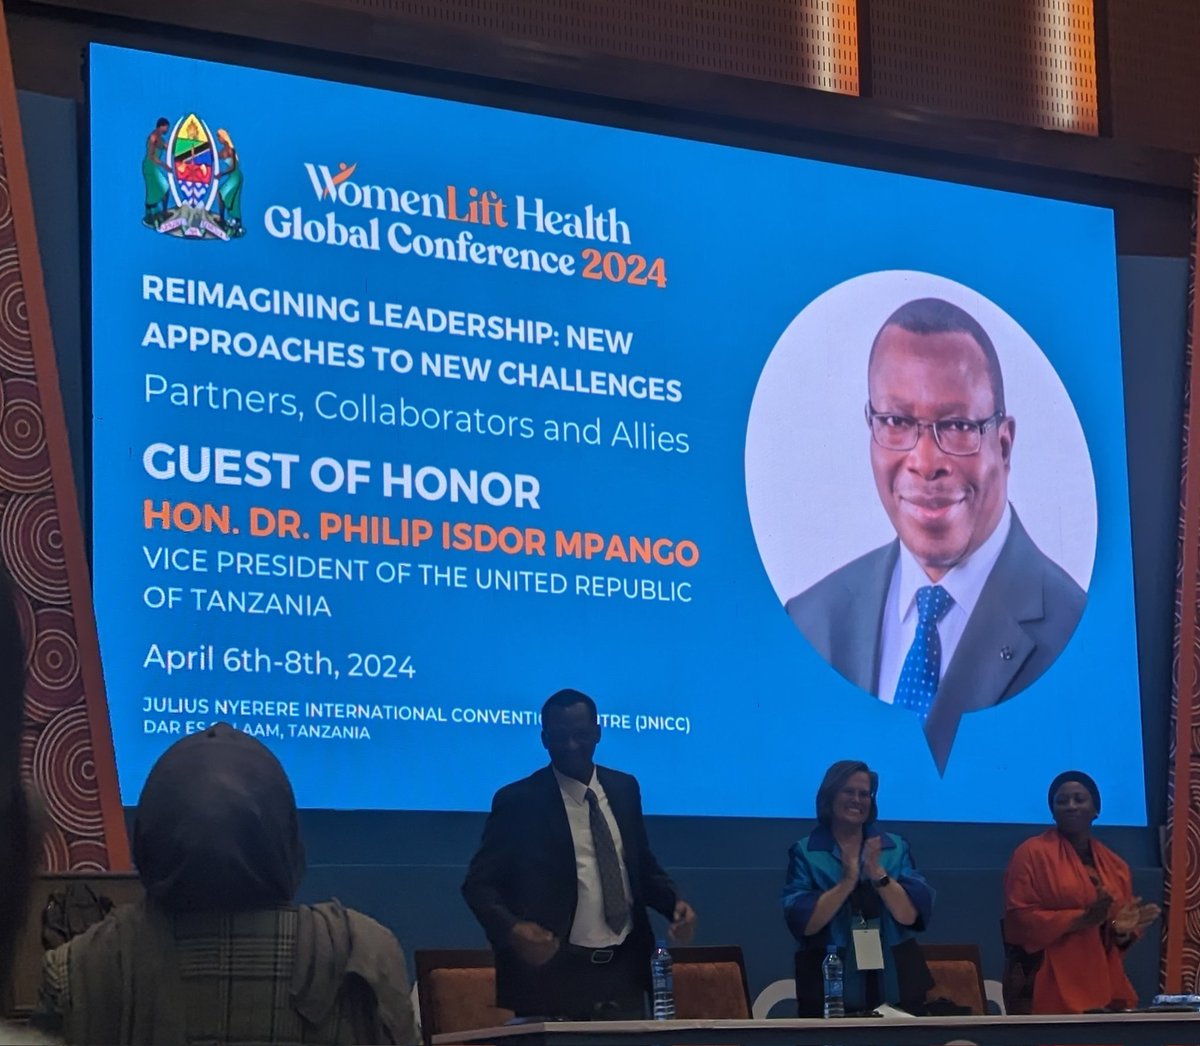 Delighted to hear the Vice President Dr Philip Mpango highlight mentorship as instrumental and key for raising women leaders in global health. #WLHGC2024 #reimaginingleadership